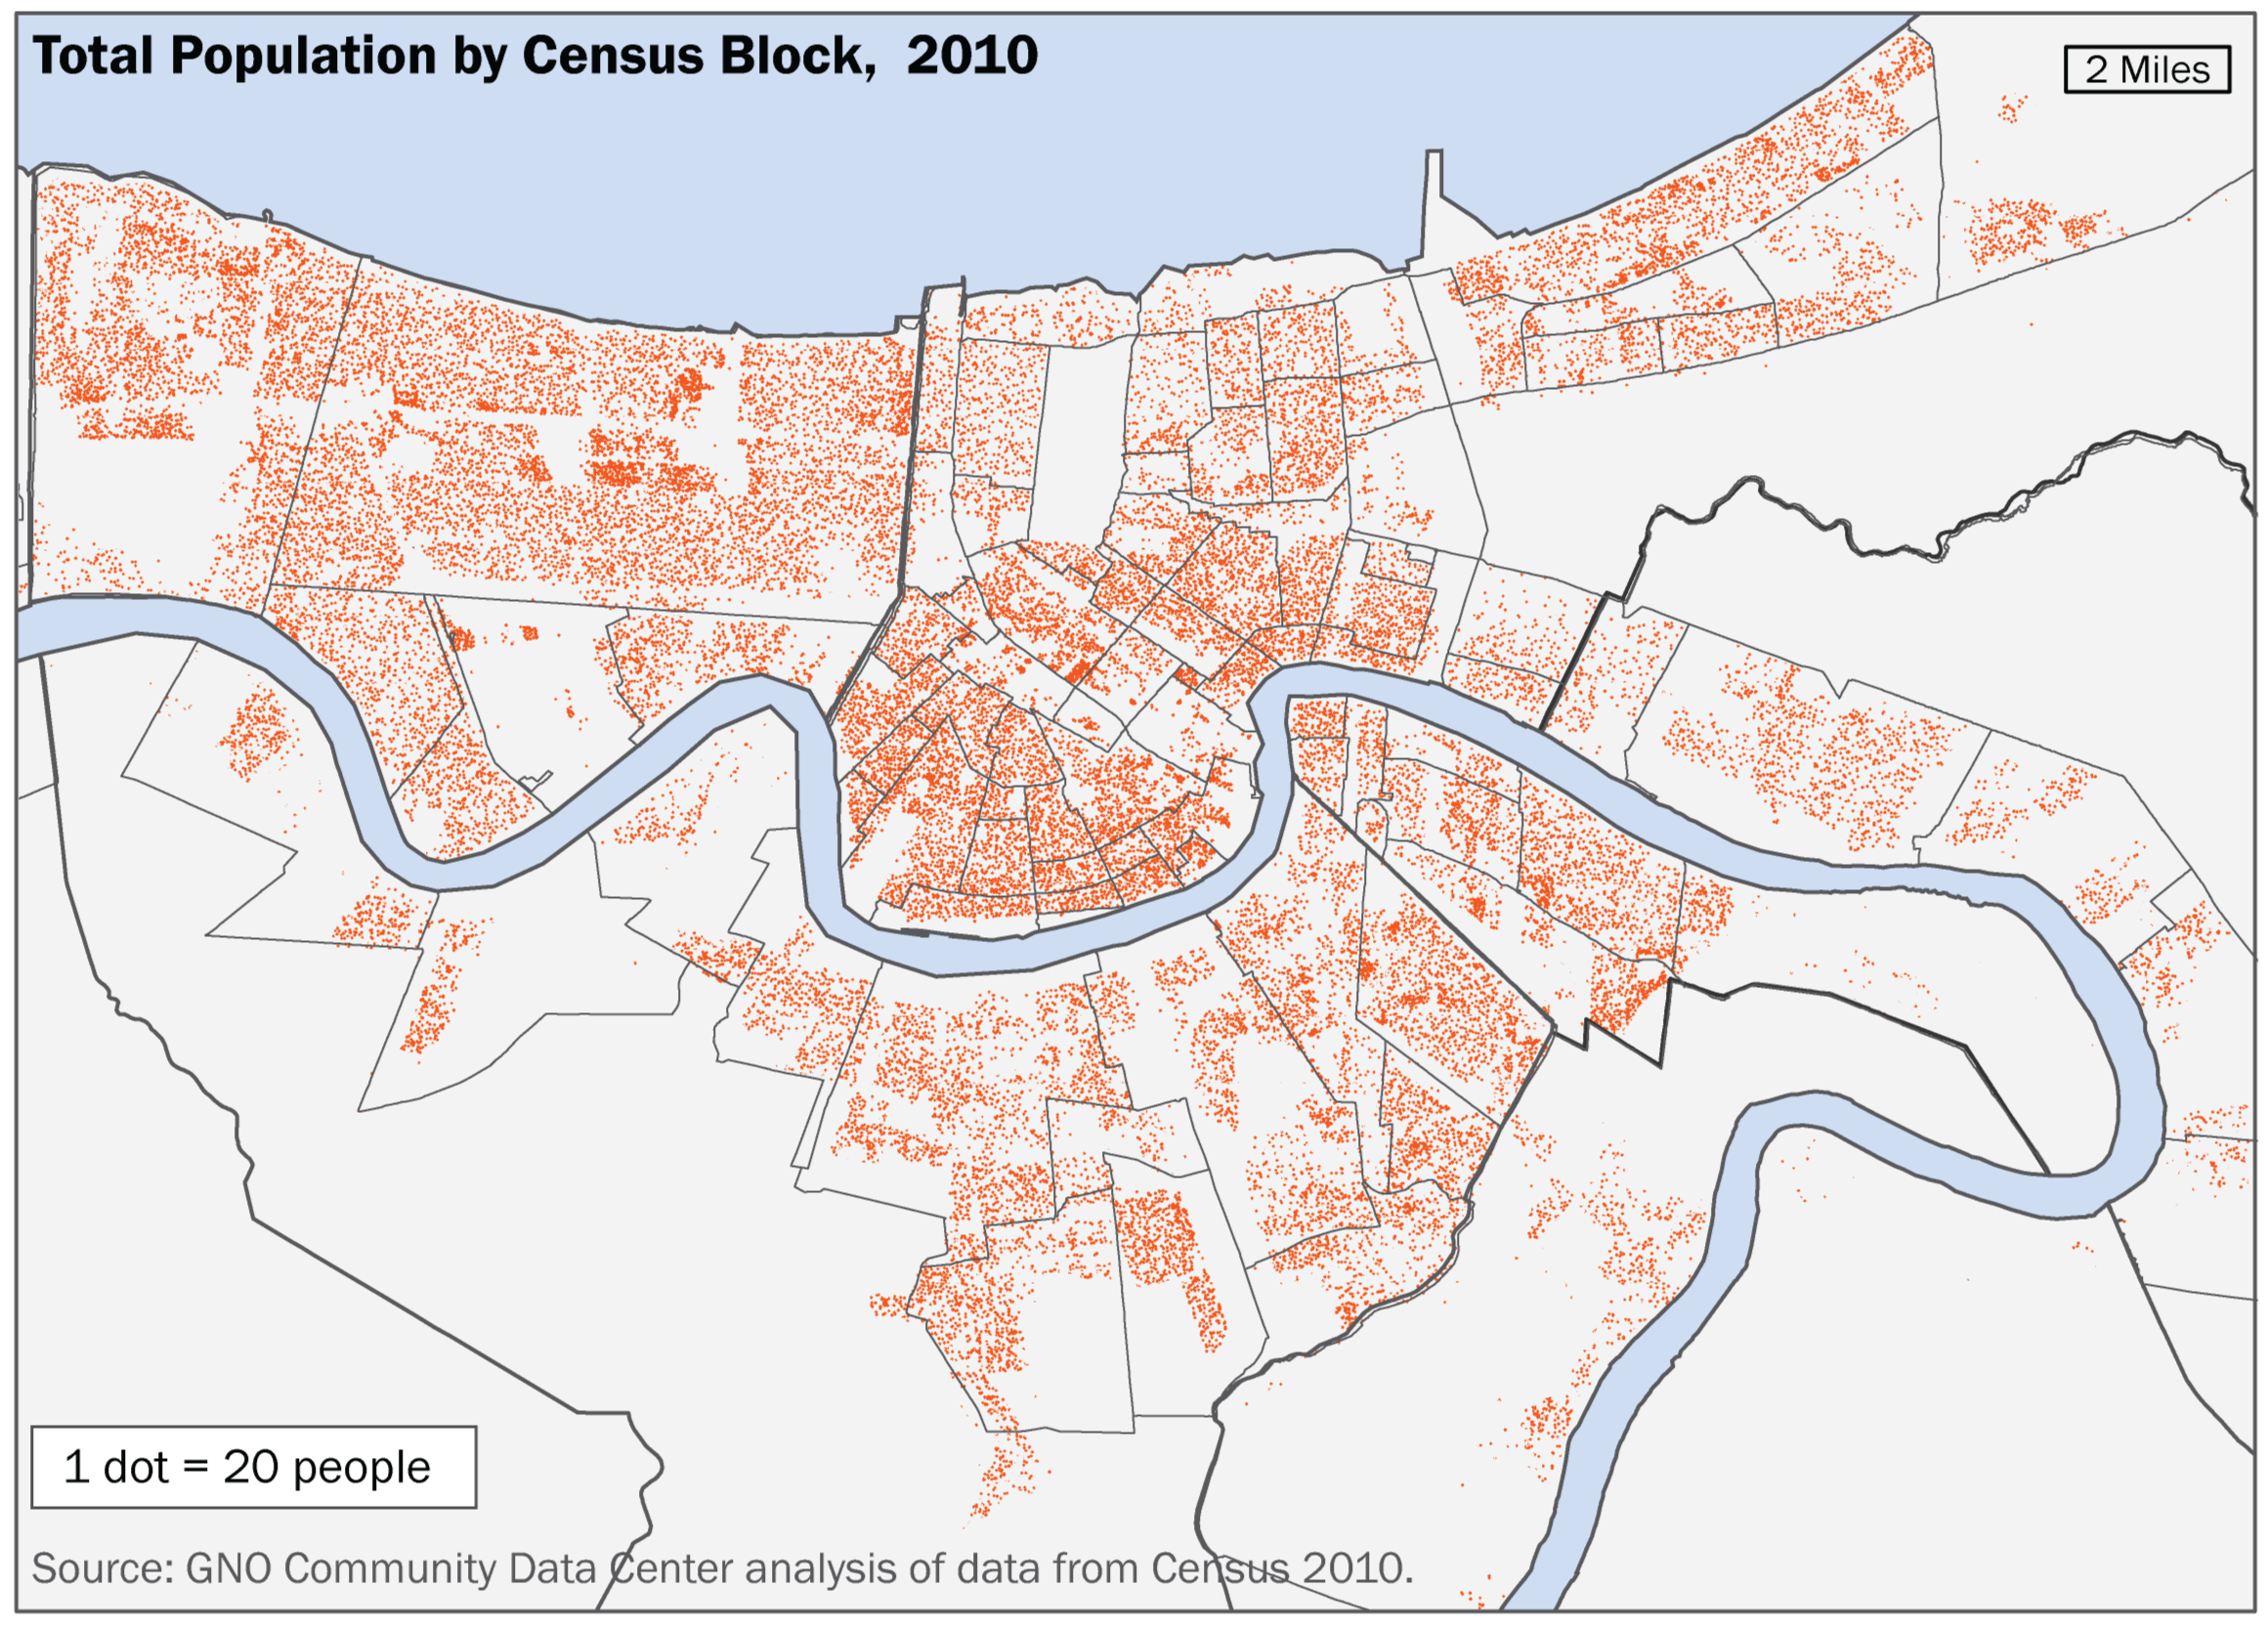 Shifts in Population and Loss of Children across the New Orleans Metro Area